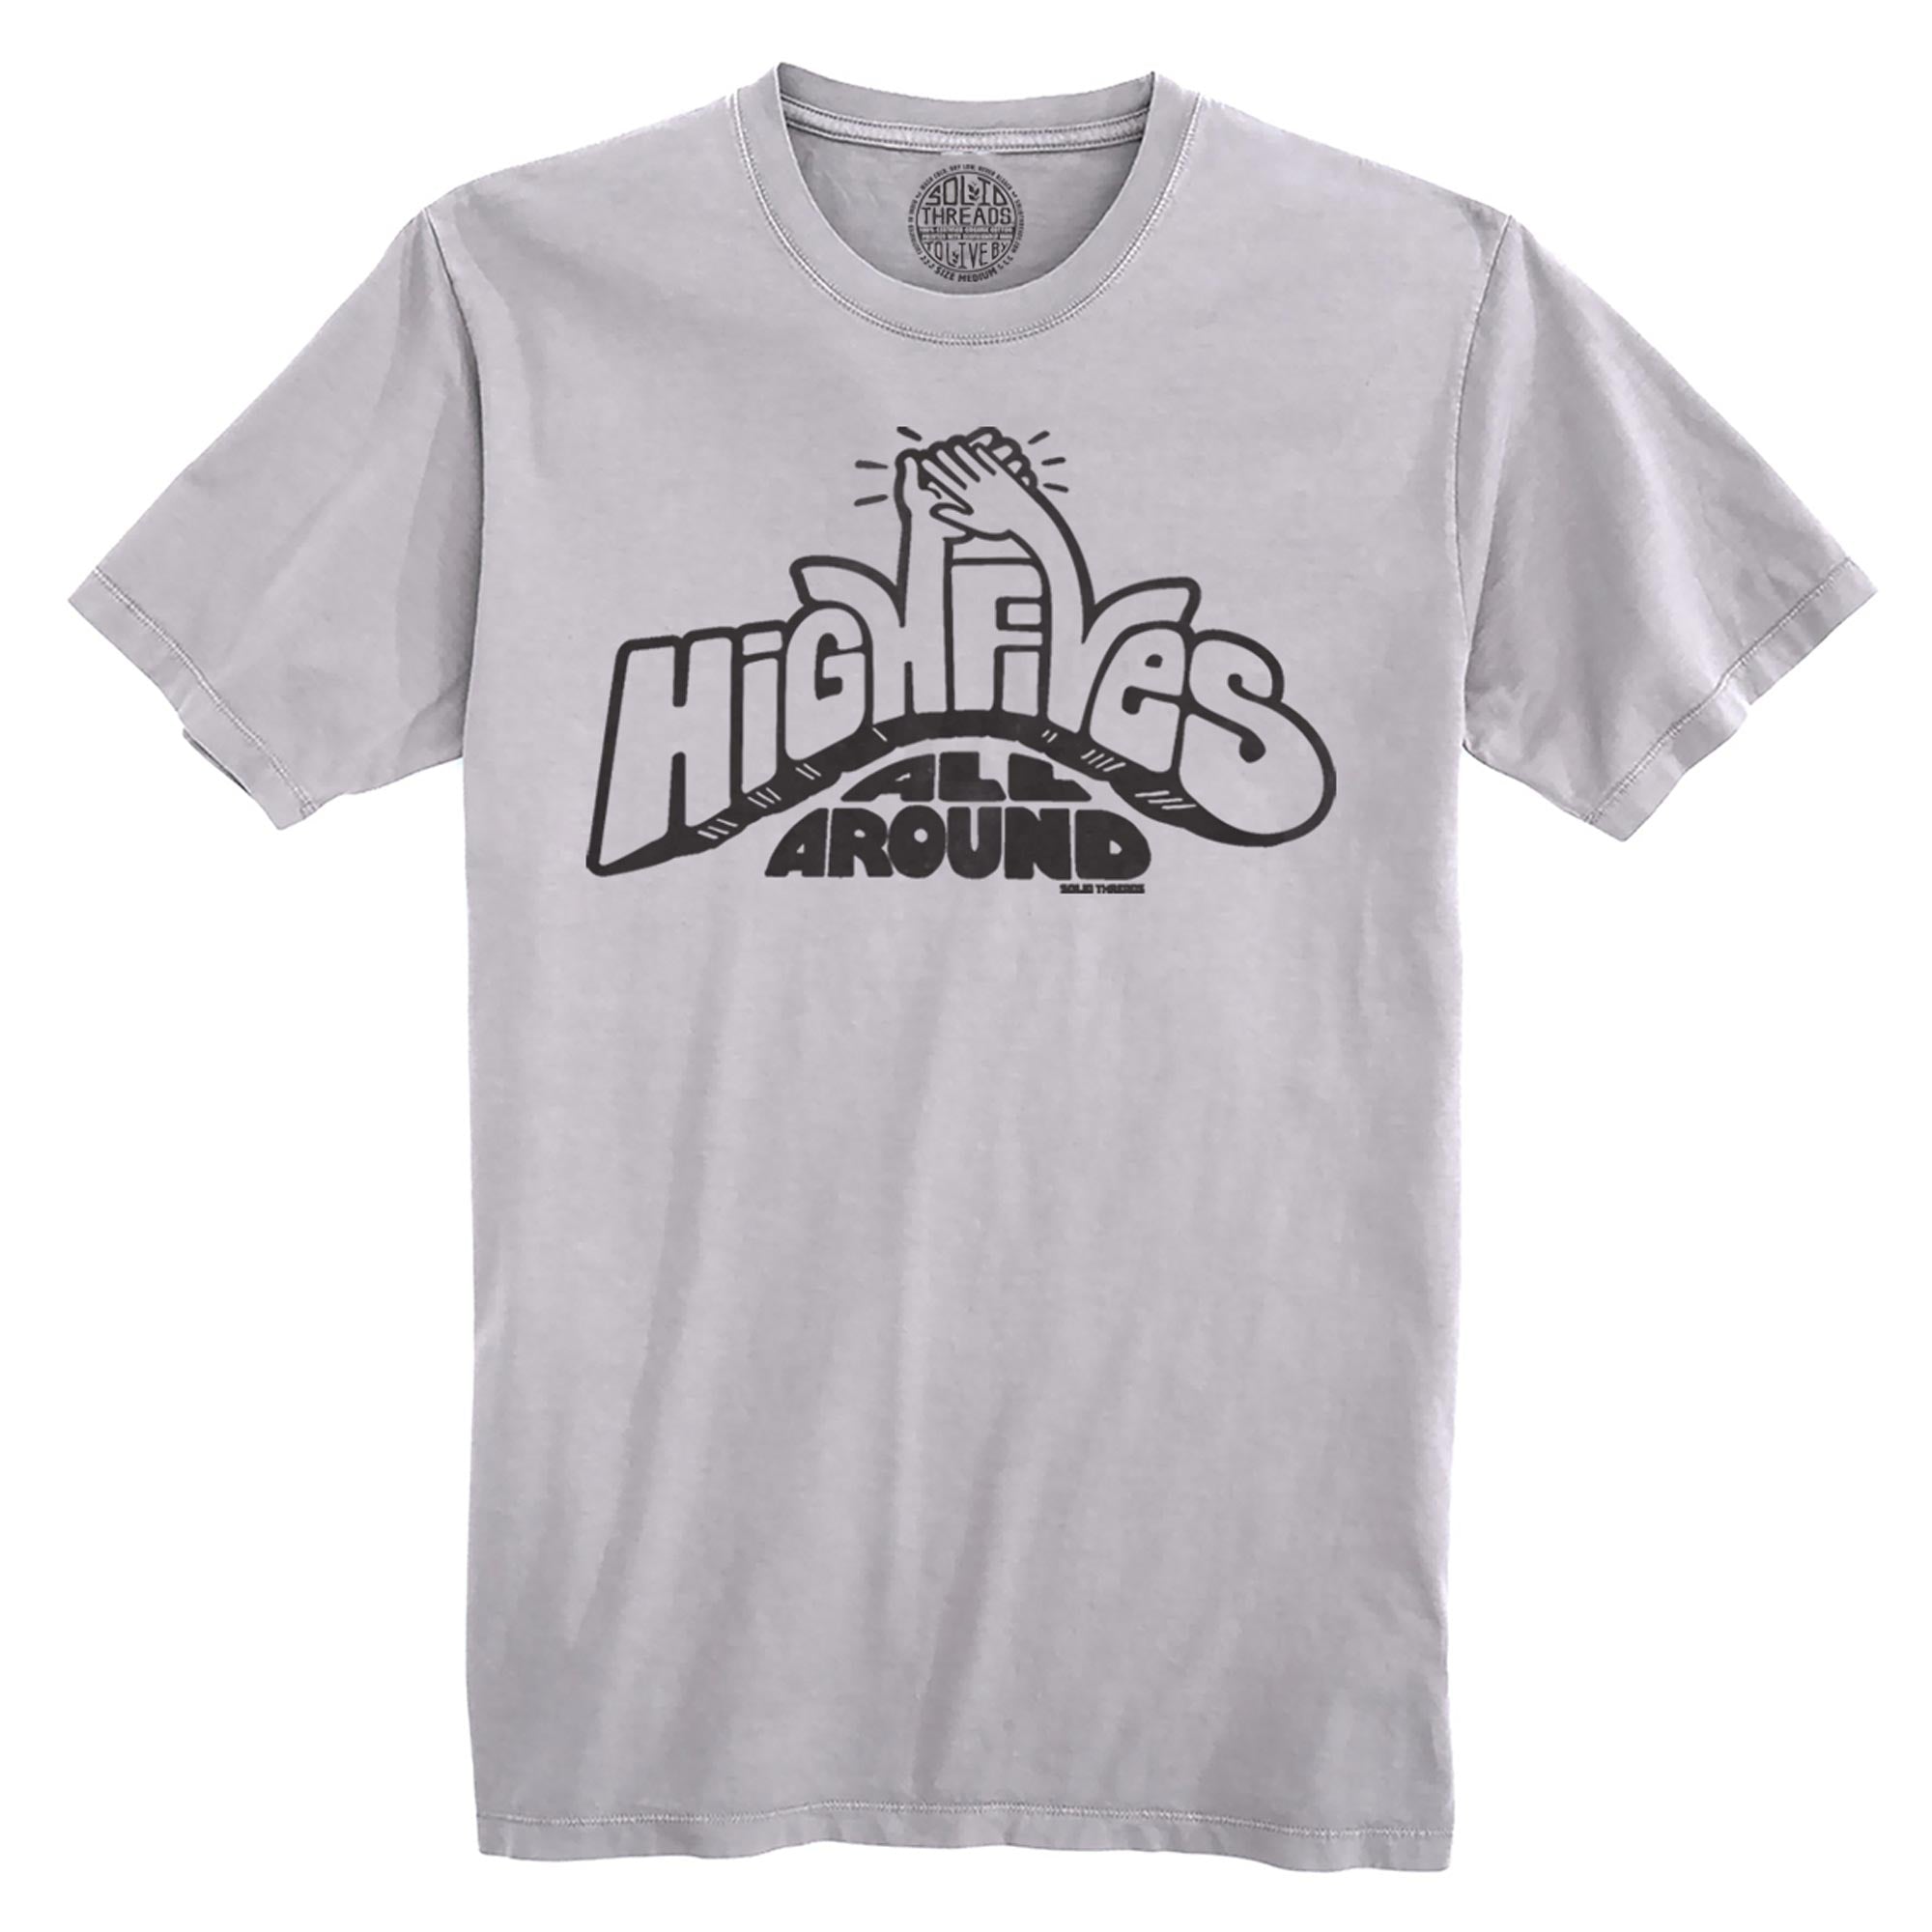 High Fives All Around Cool Organic Cotton T-shirt | Vintage Wholesome Gift  Tee | Solid Threads